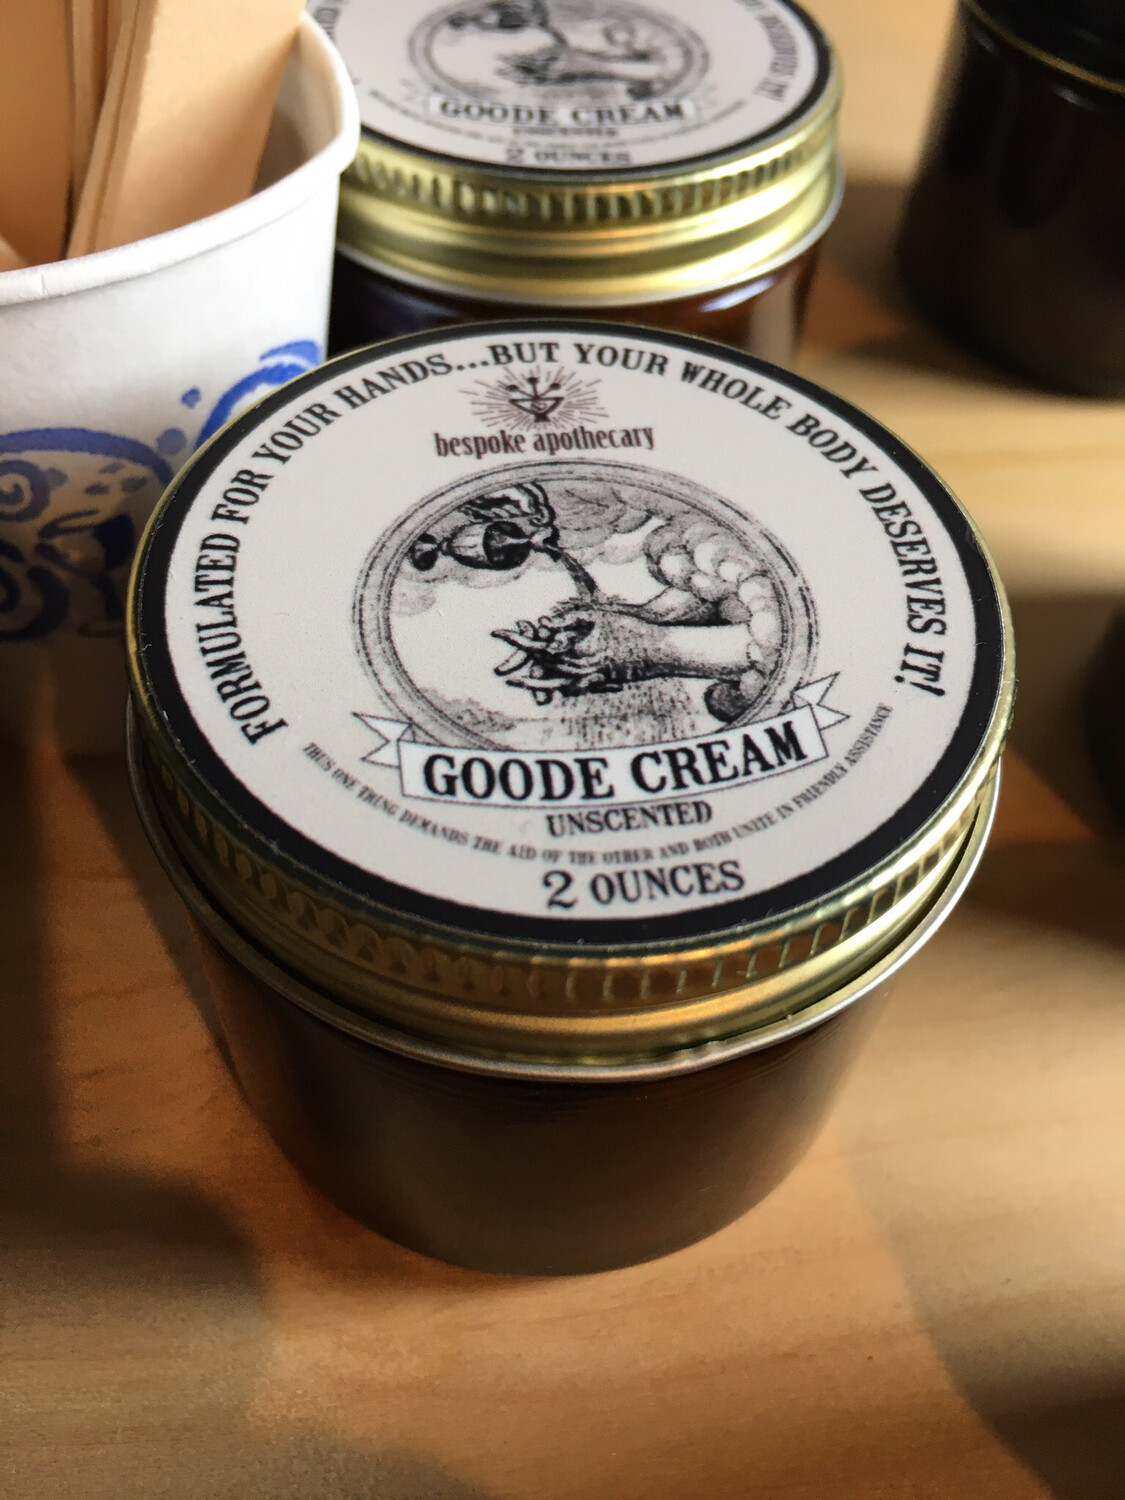 2 oz. GOODE Cream - formulated for your hands but your whole body deserves it!